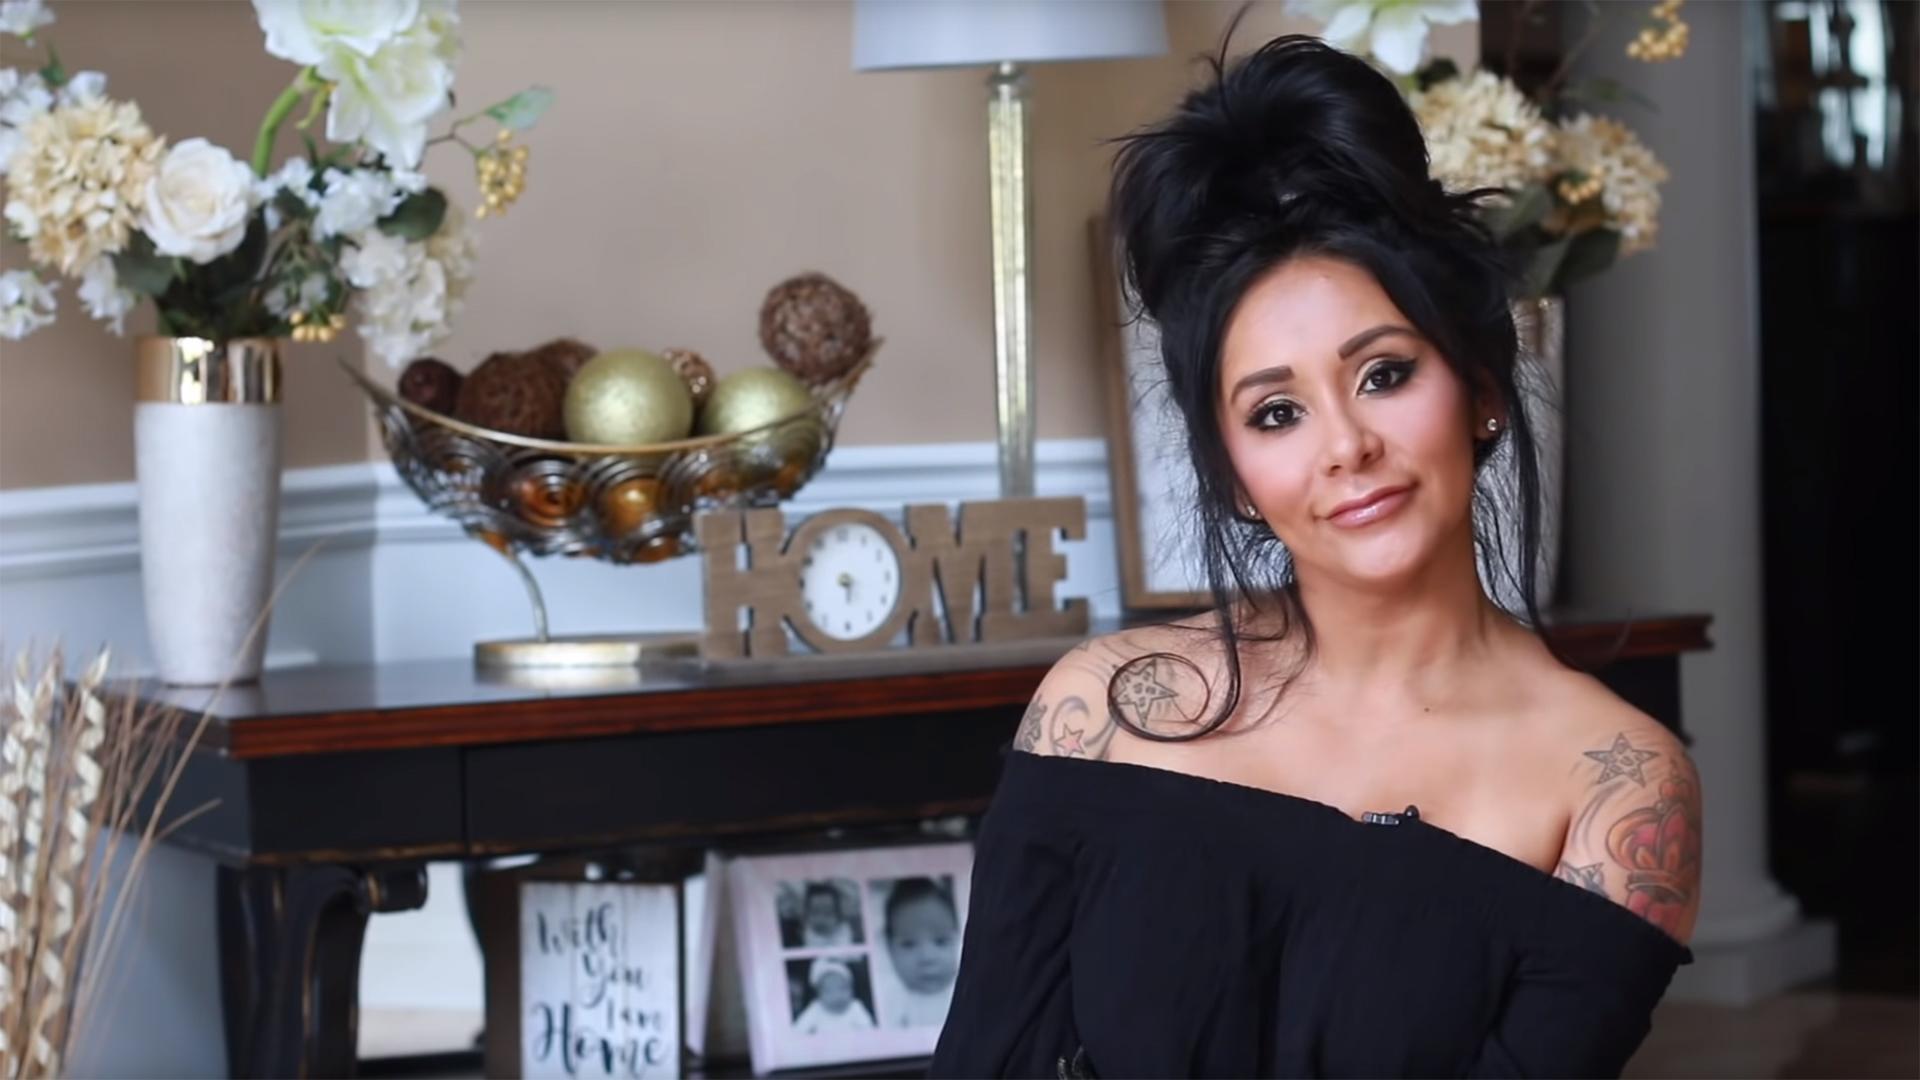 Nicole 'Snooki' Polizzi opens up about being adopted: 'I am blessed'